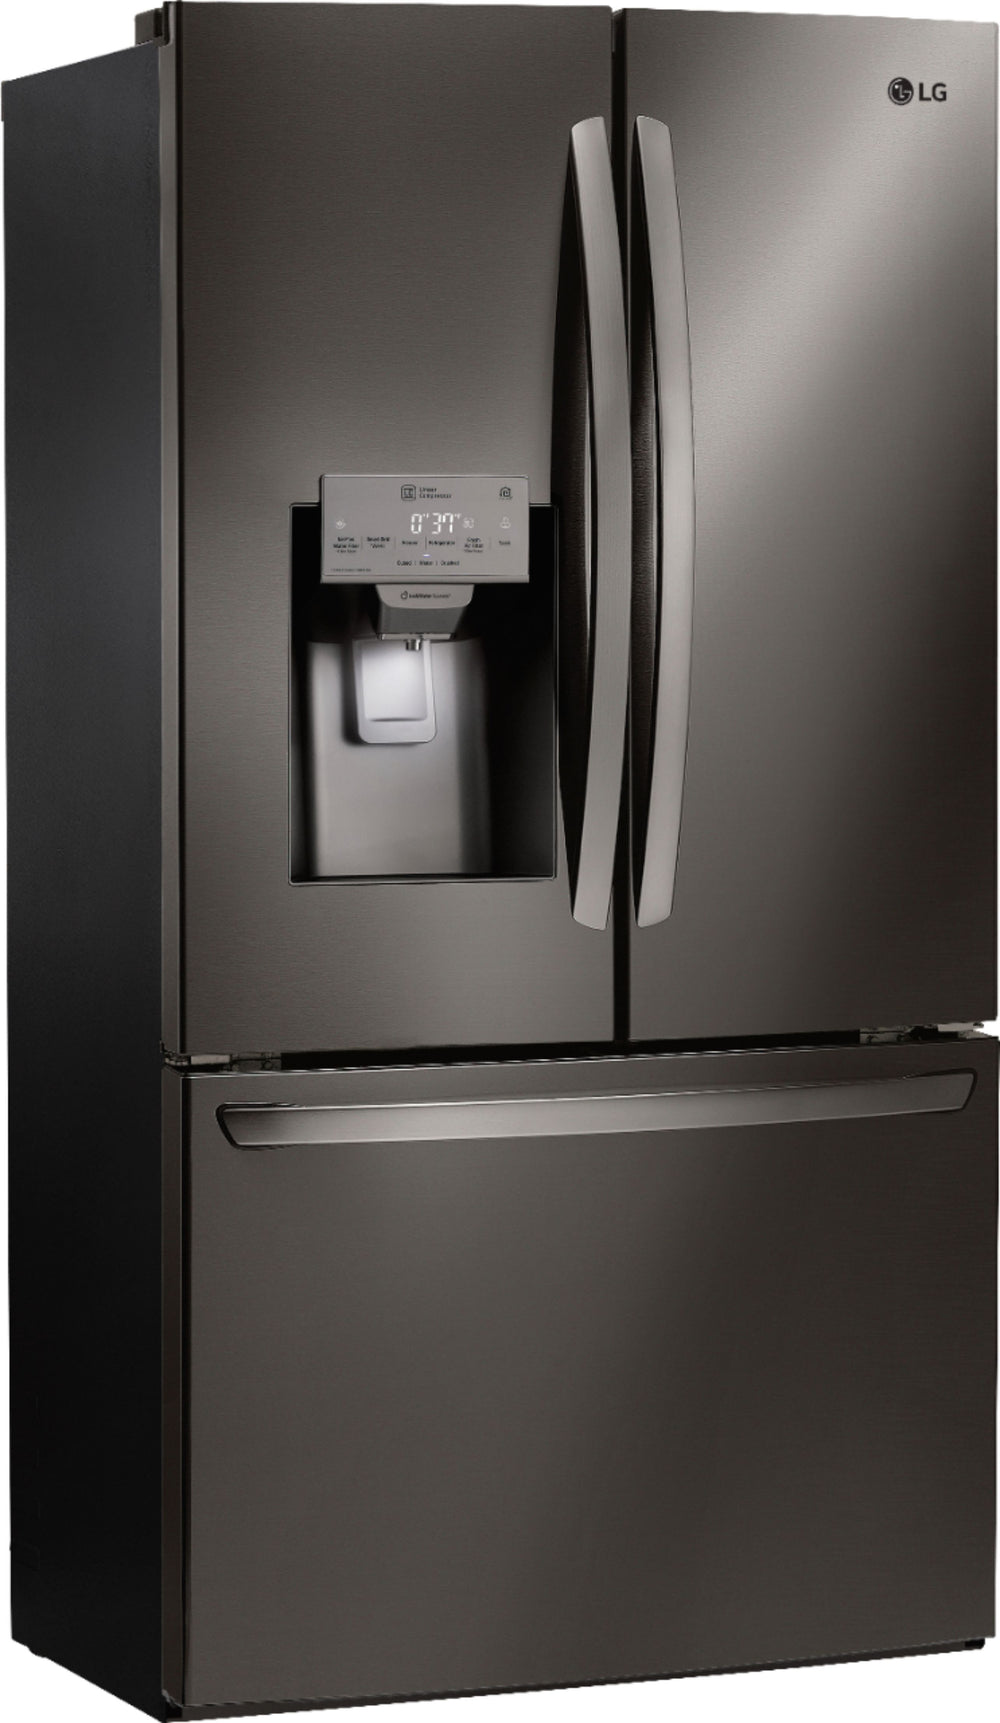 LG - 26.2 Cu. Ft. French Door Smart Refrigerator with Dual Ice Maker - Black stainless steel_1